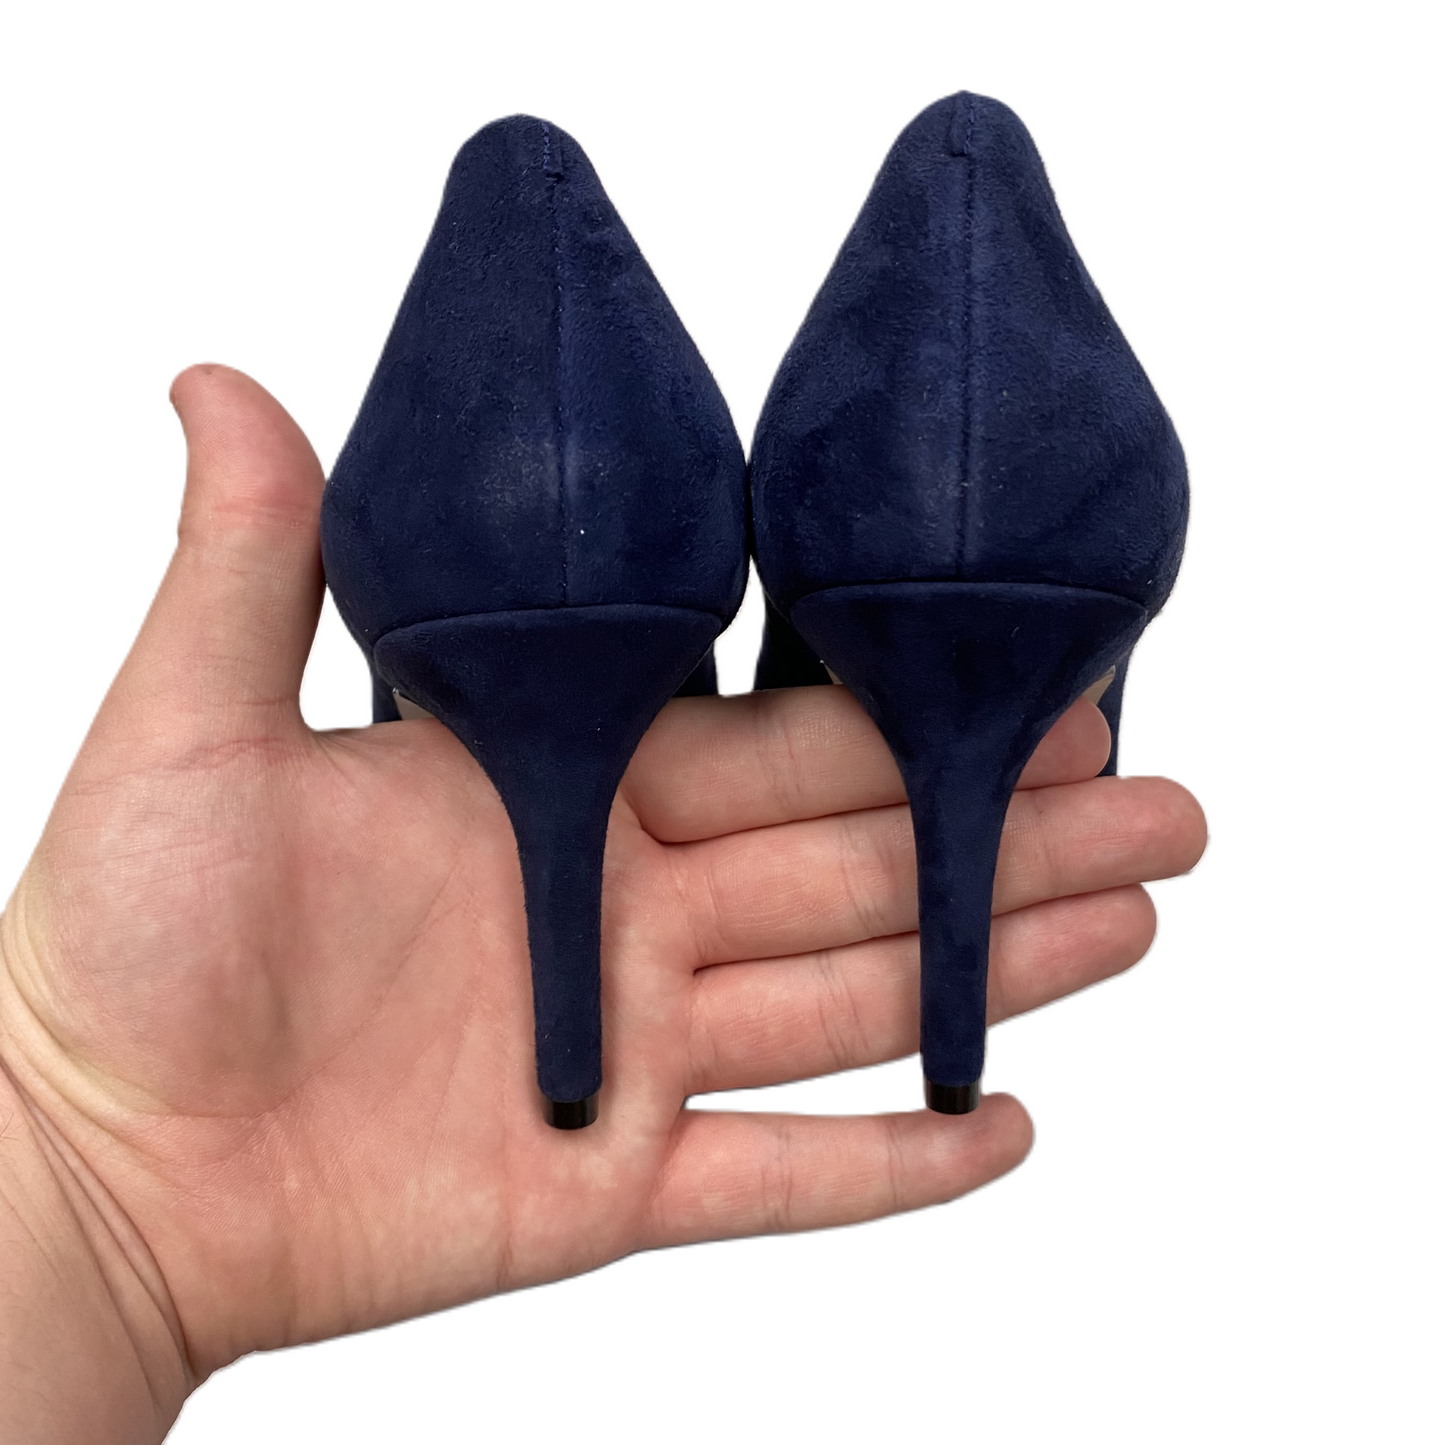 Navy Shoes Heels Stiletto By Inc, Size: 8.5